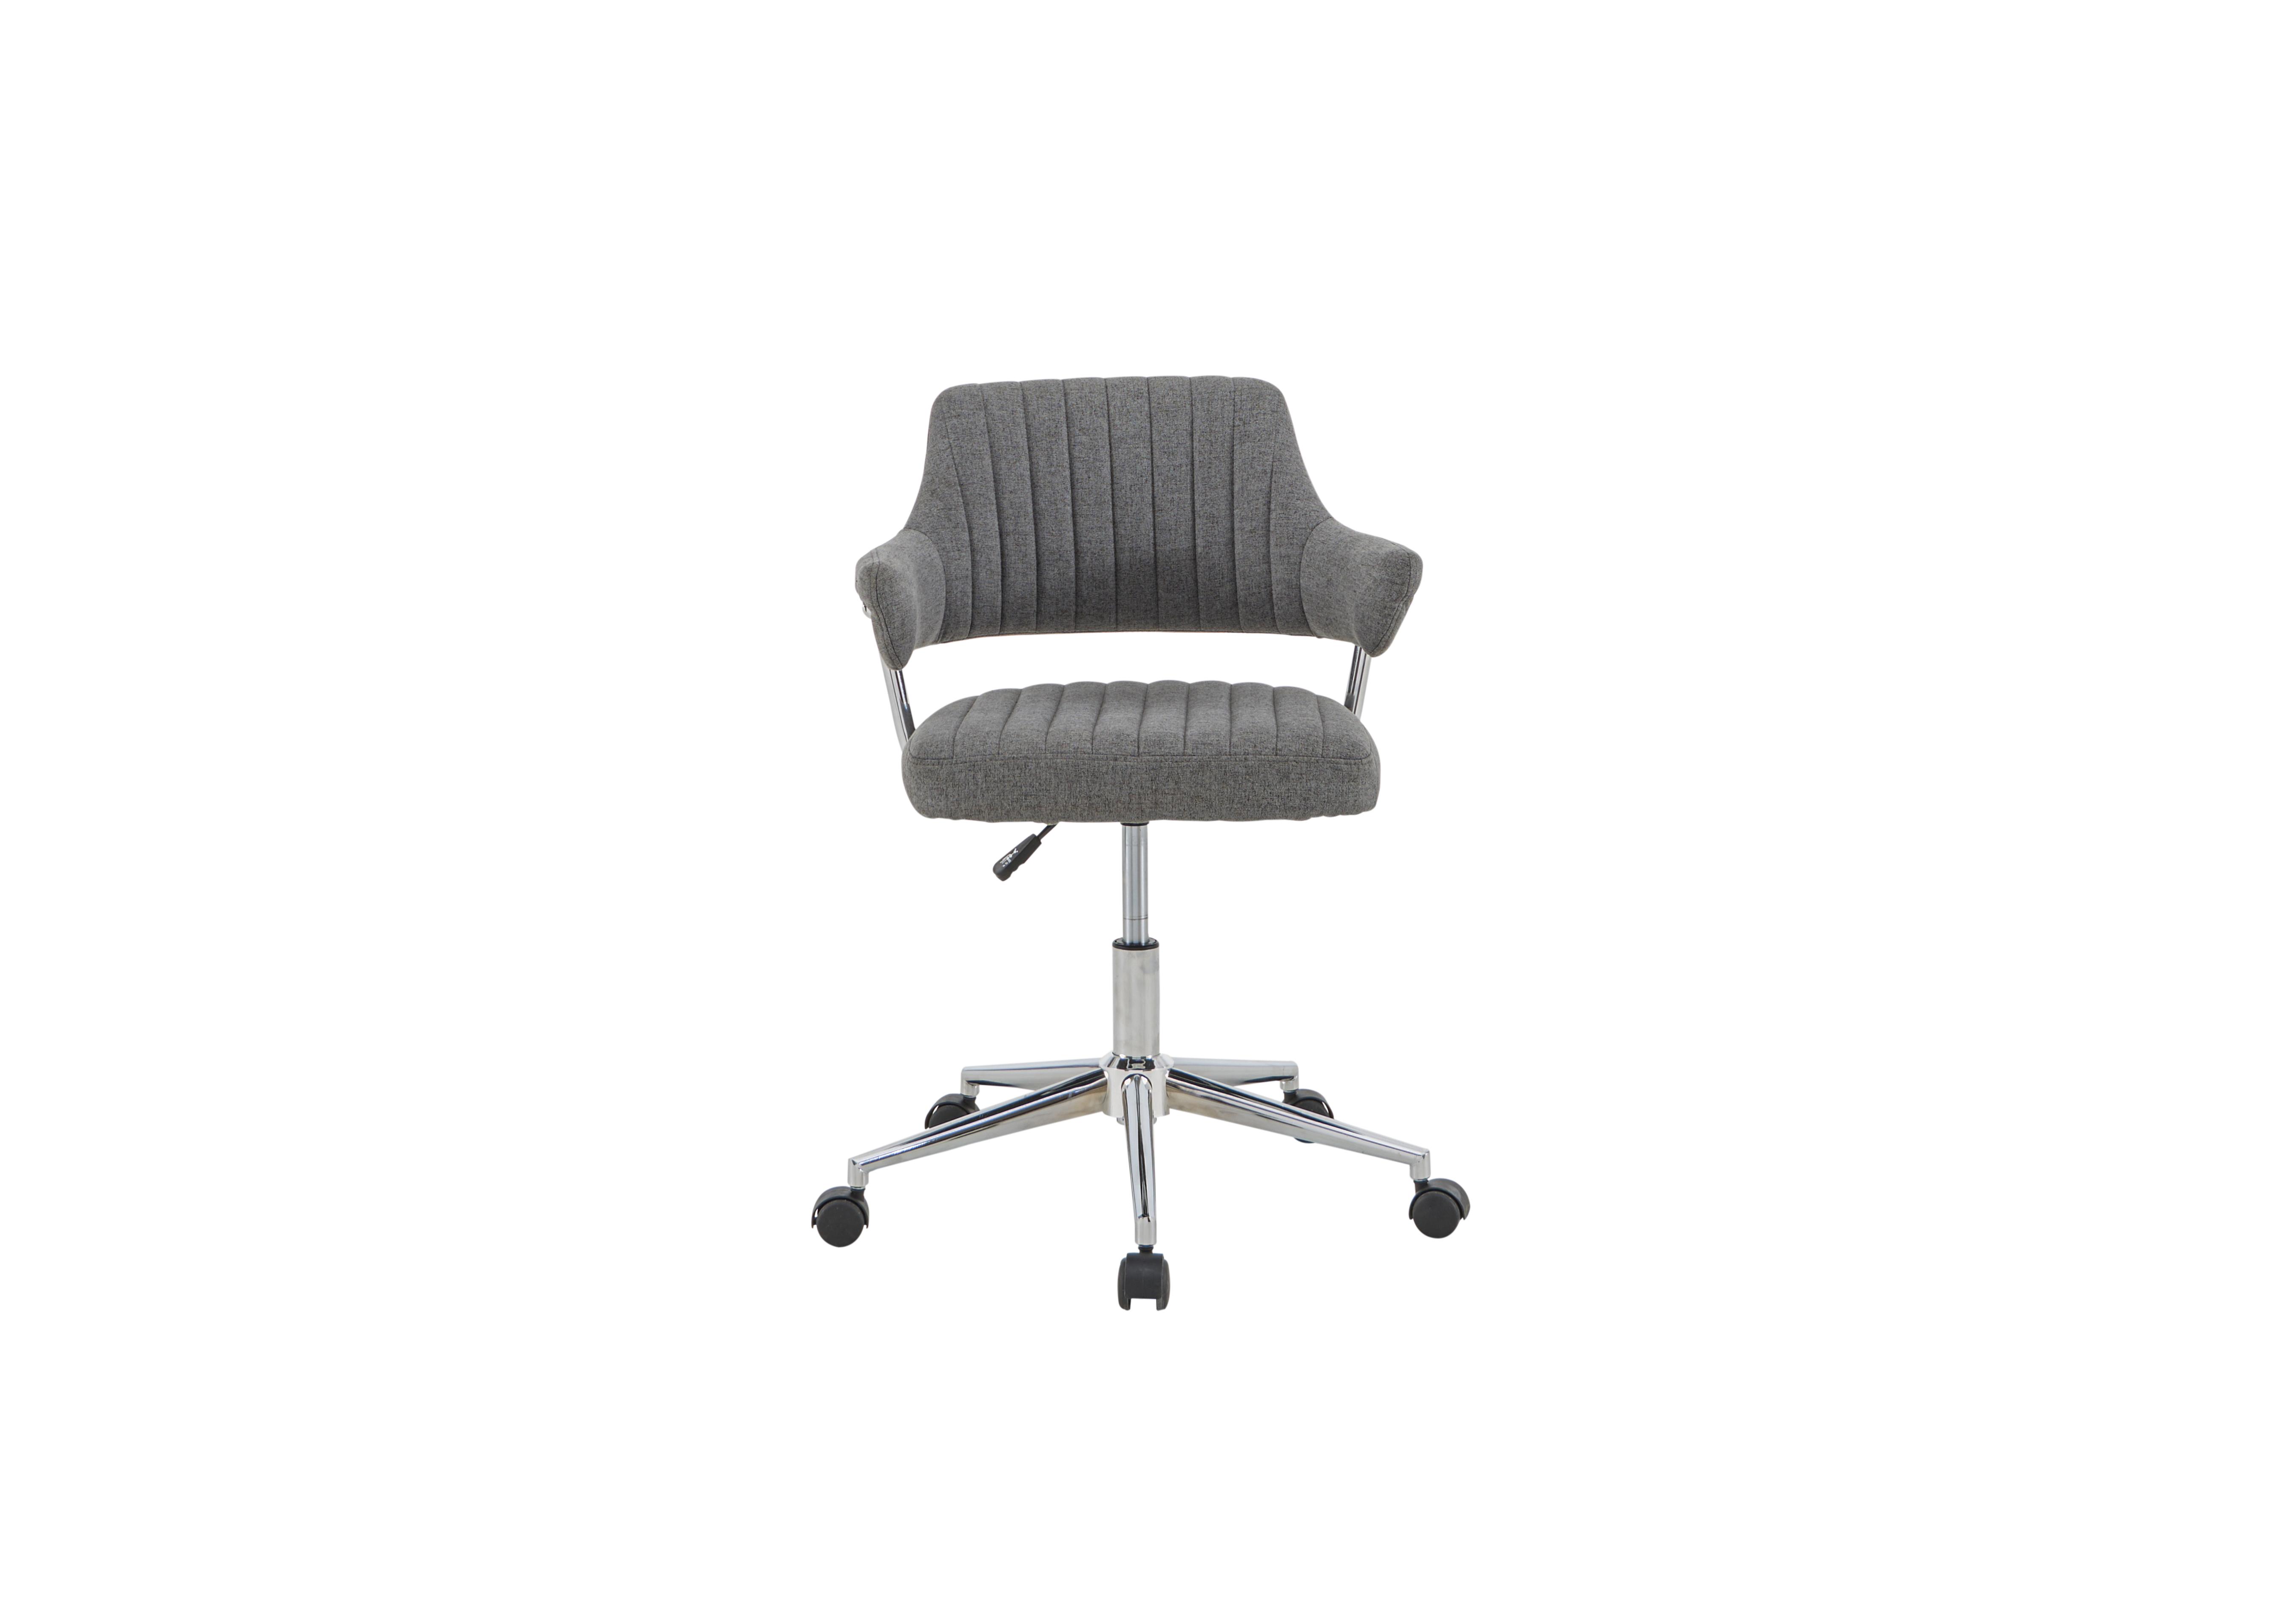 Blaire Swivel Office Chair in Grey on Furniture Village